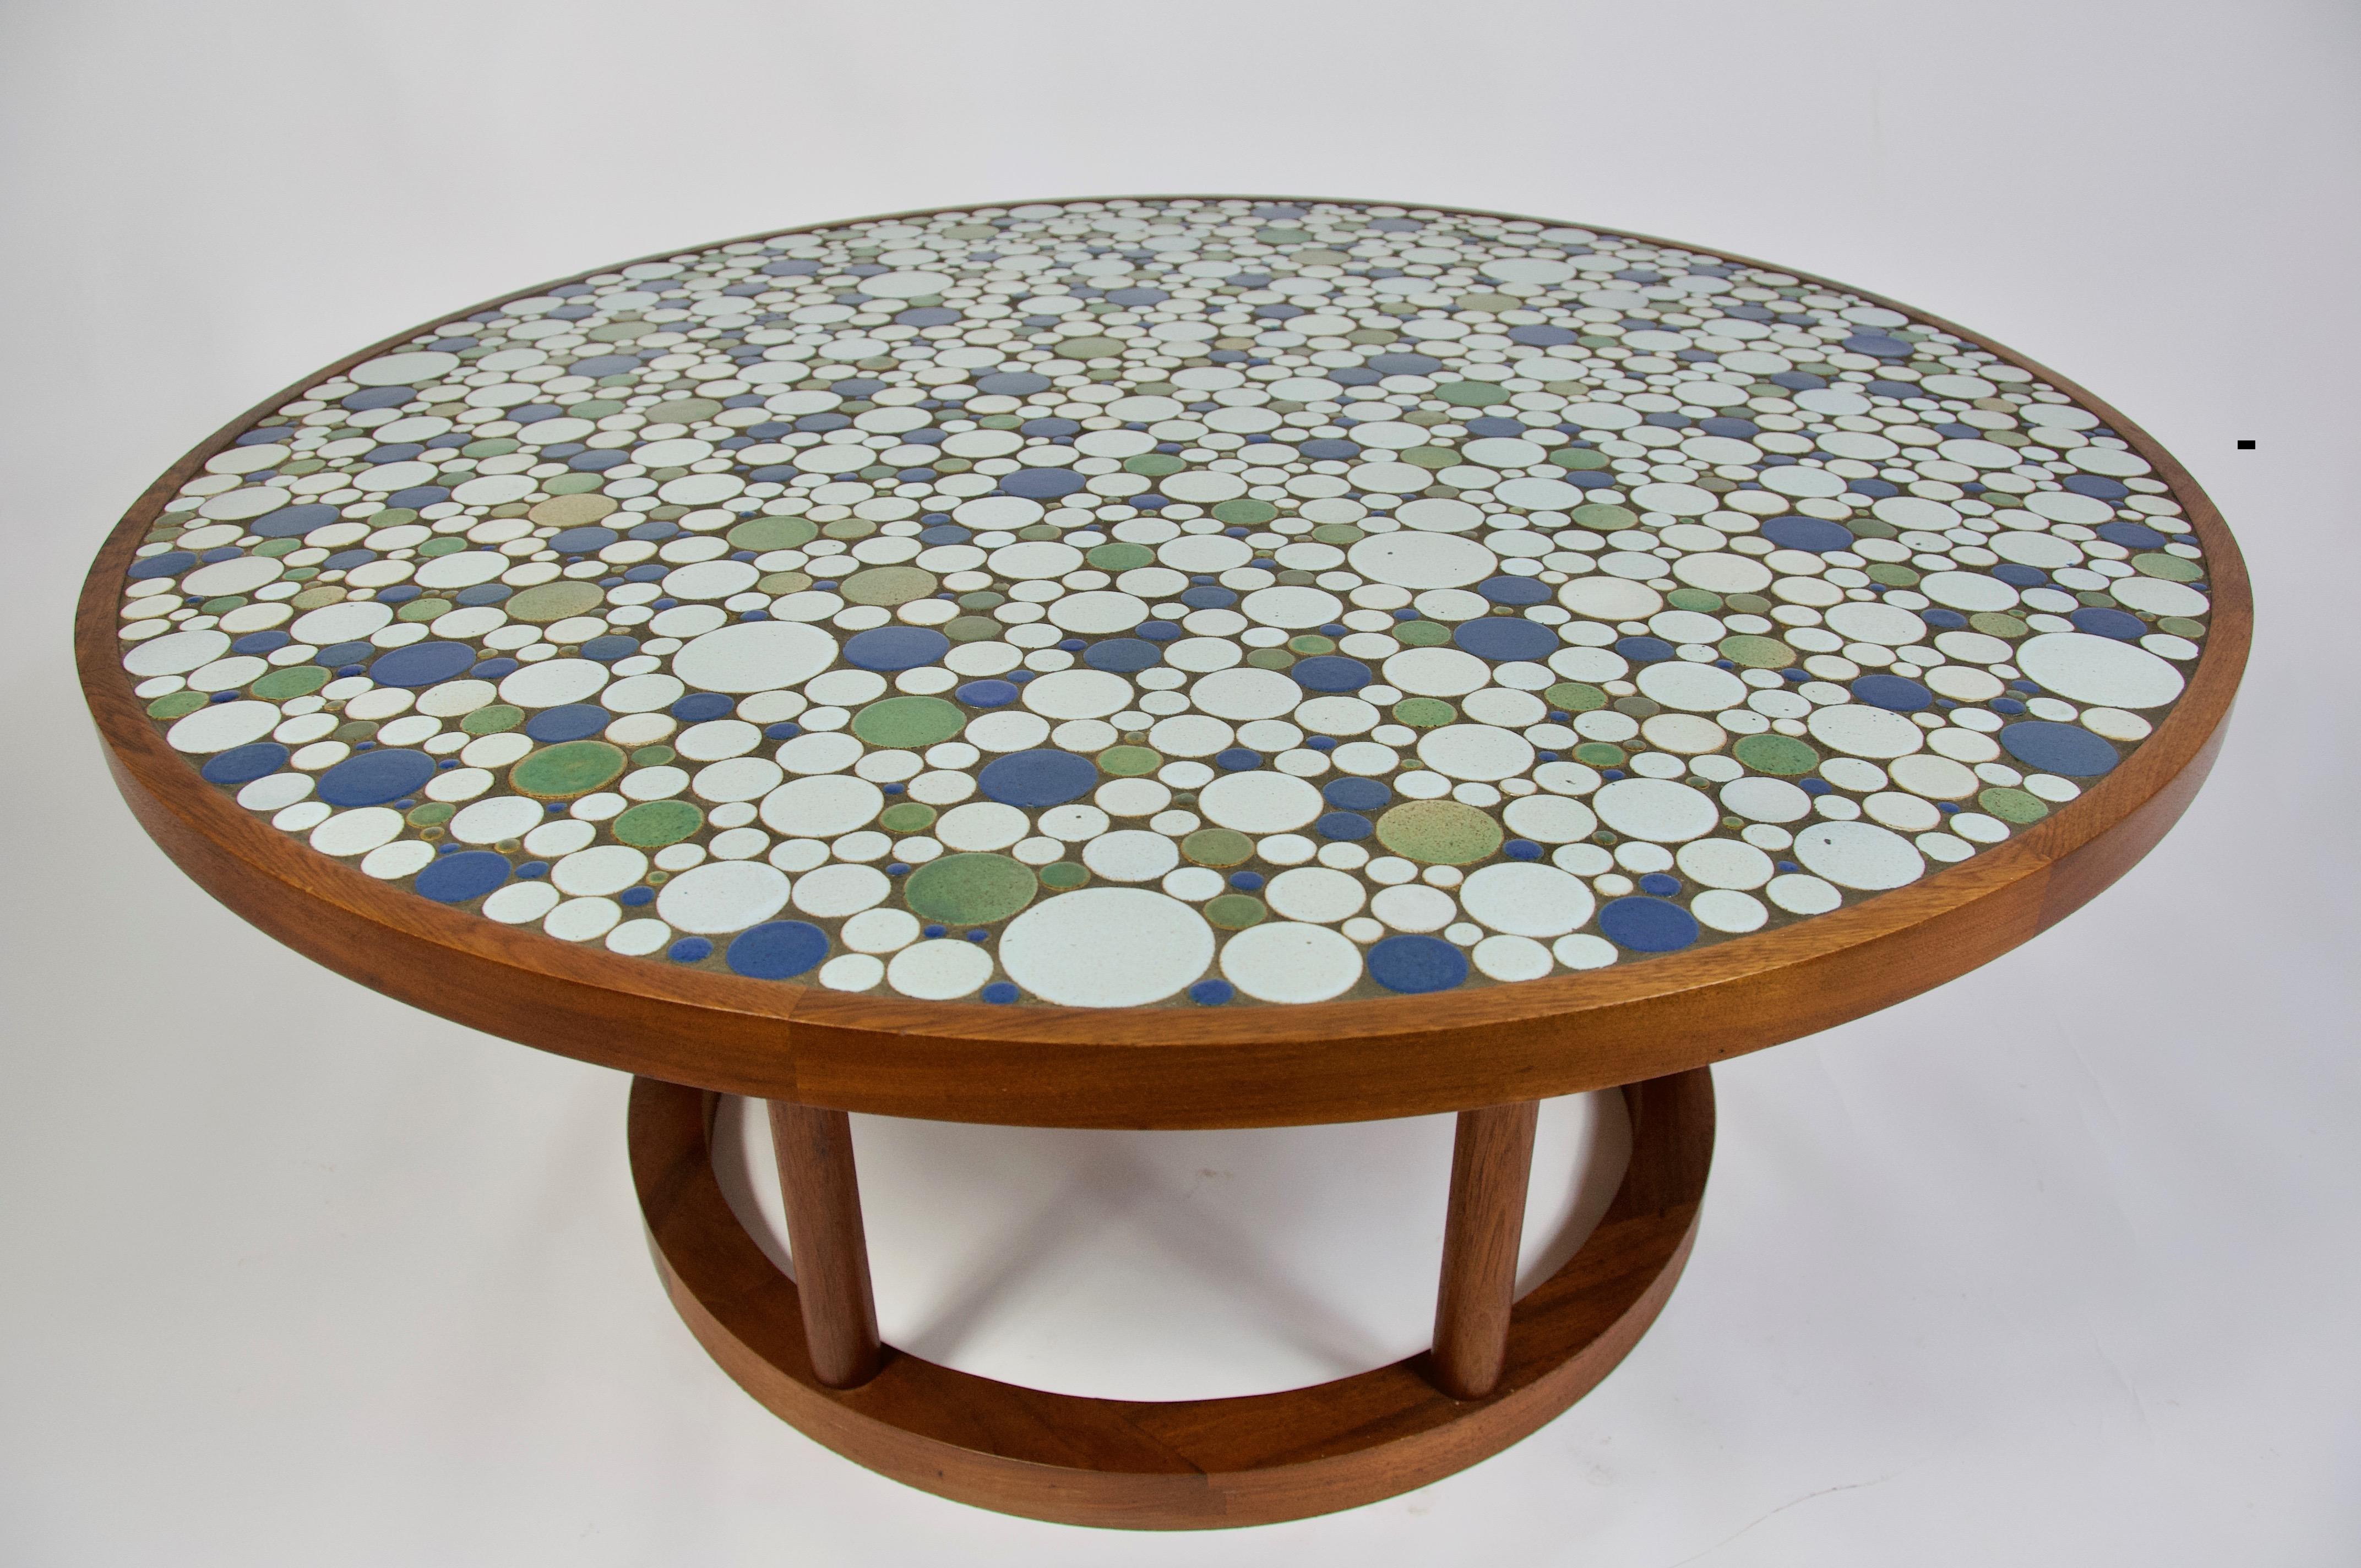 Ceramic tile-top coffee table by Gordon and Jane Martz for Marshall Studios. Walnut frame.